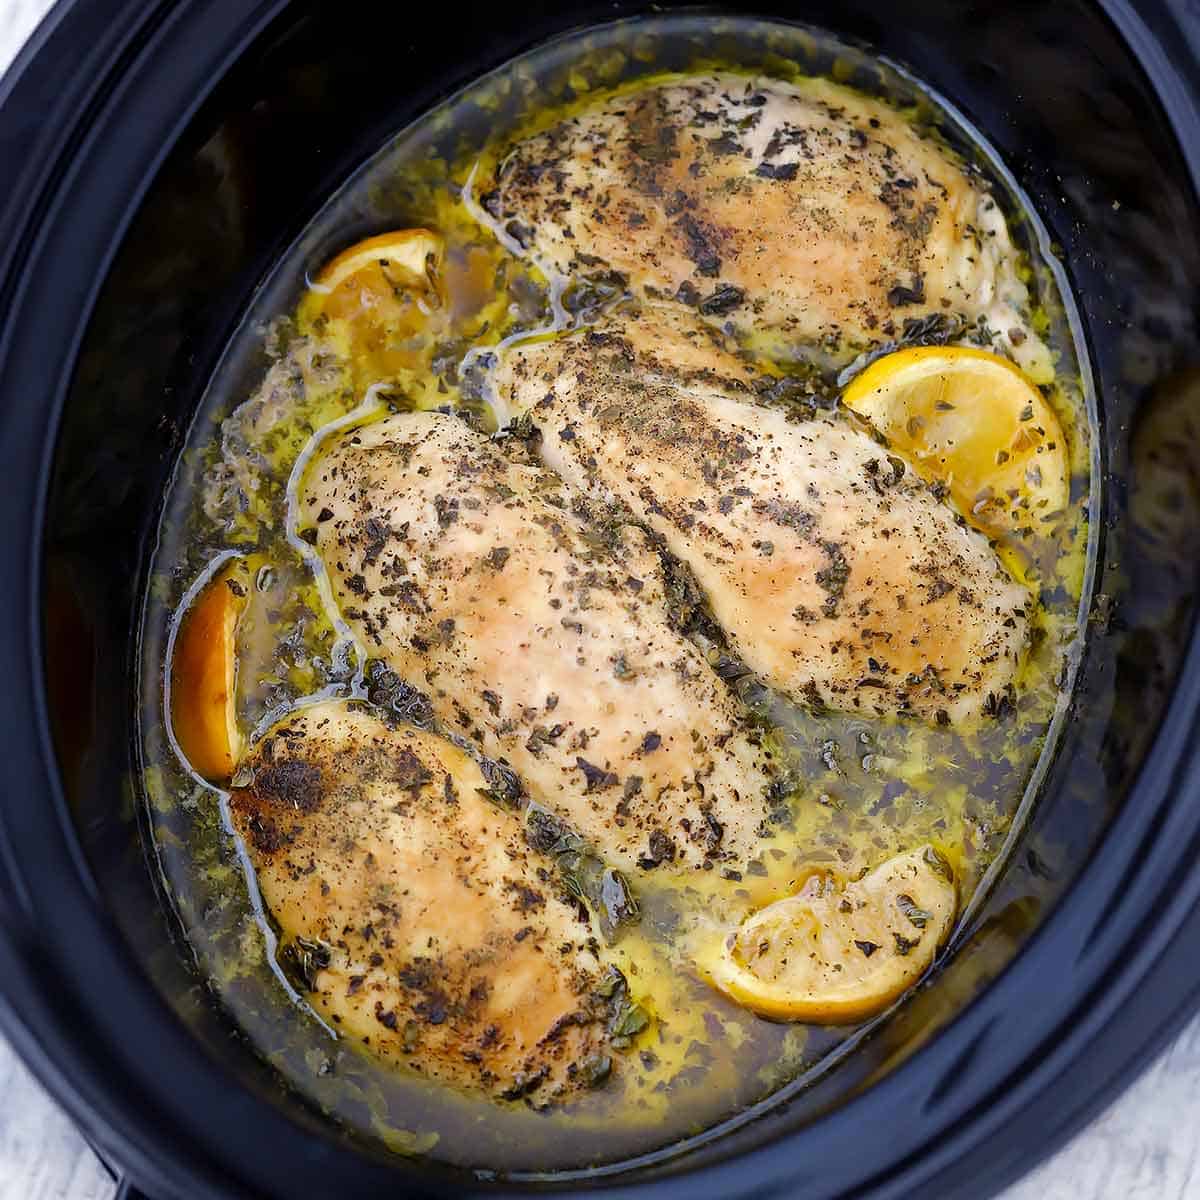 https://www.bowlofdelicious.com/wp-content/uploads/2020/10/slow-cooker-chicken-breasts-square.jpg